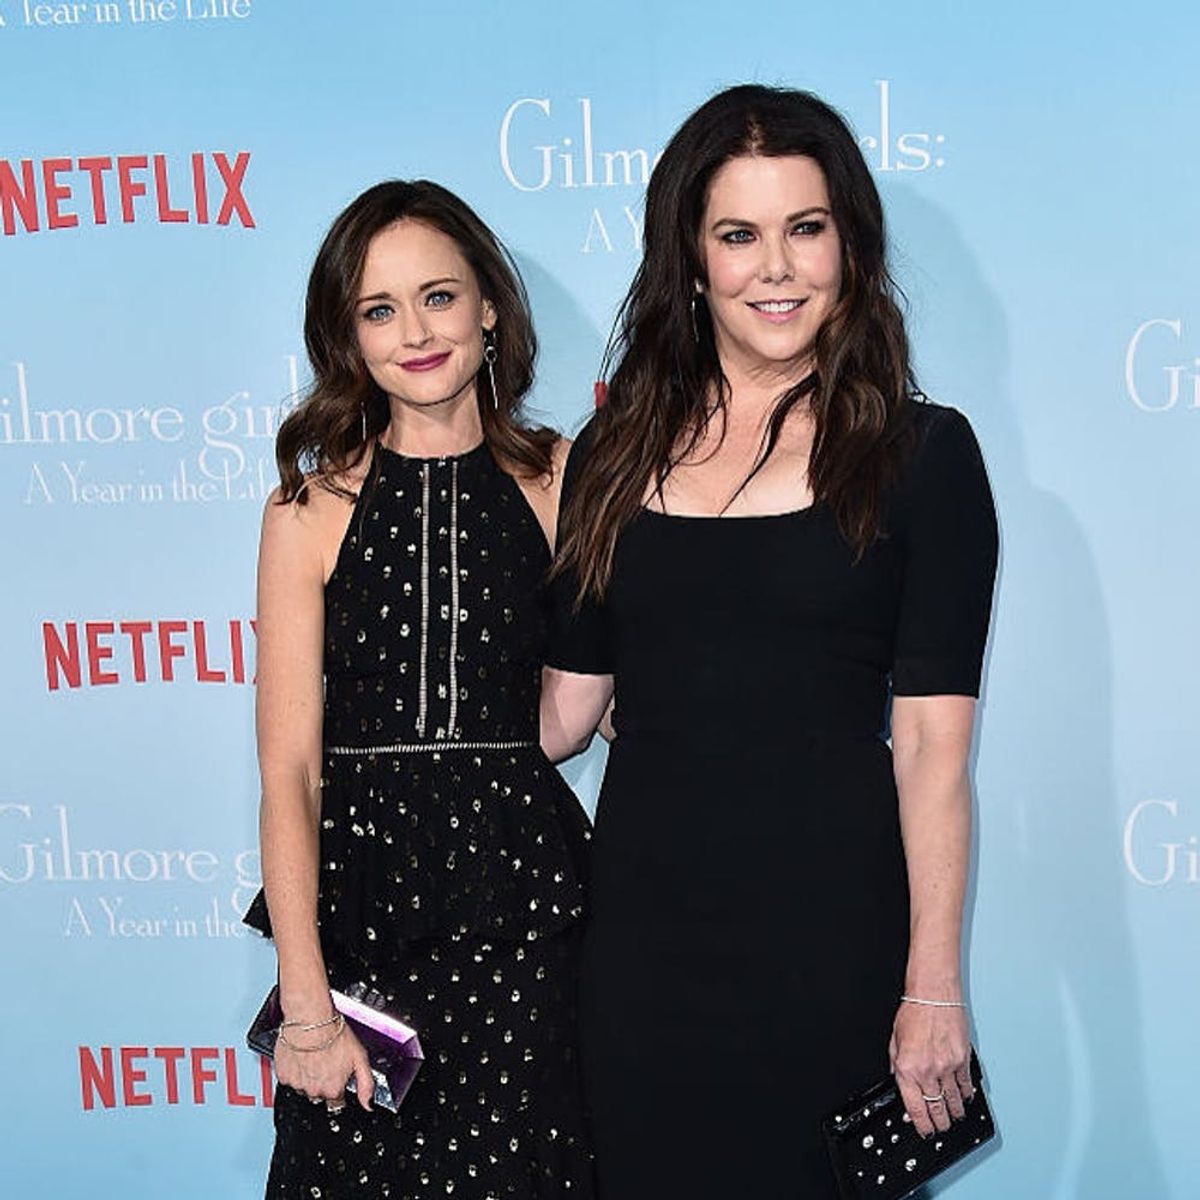 Morning Buzz! Netflix and Gilmore Girls Are Officially in Talks About New Episodes + More